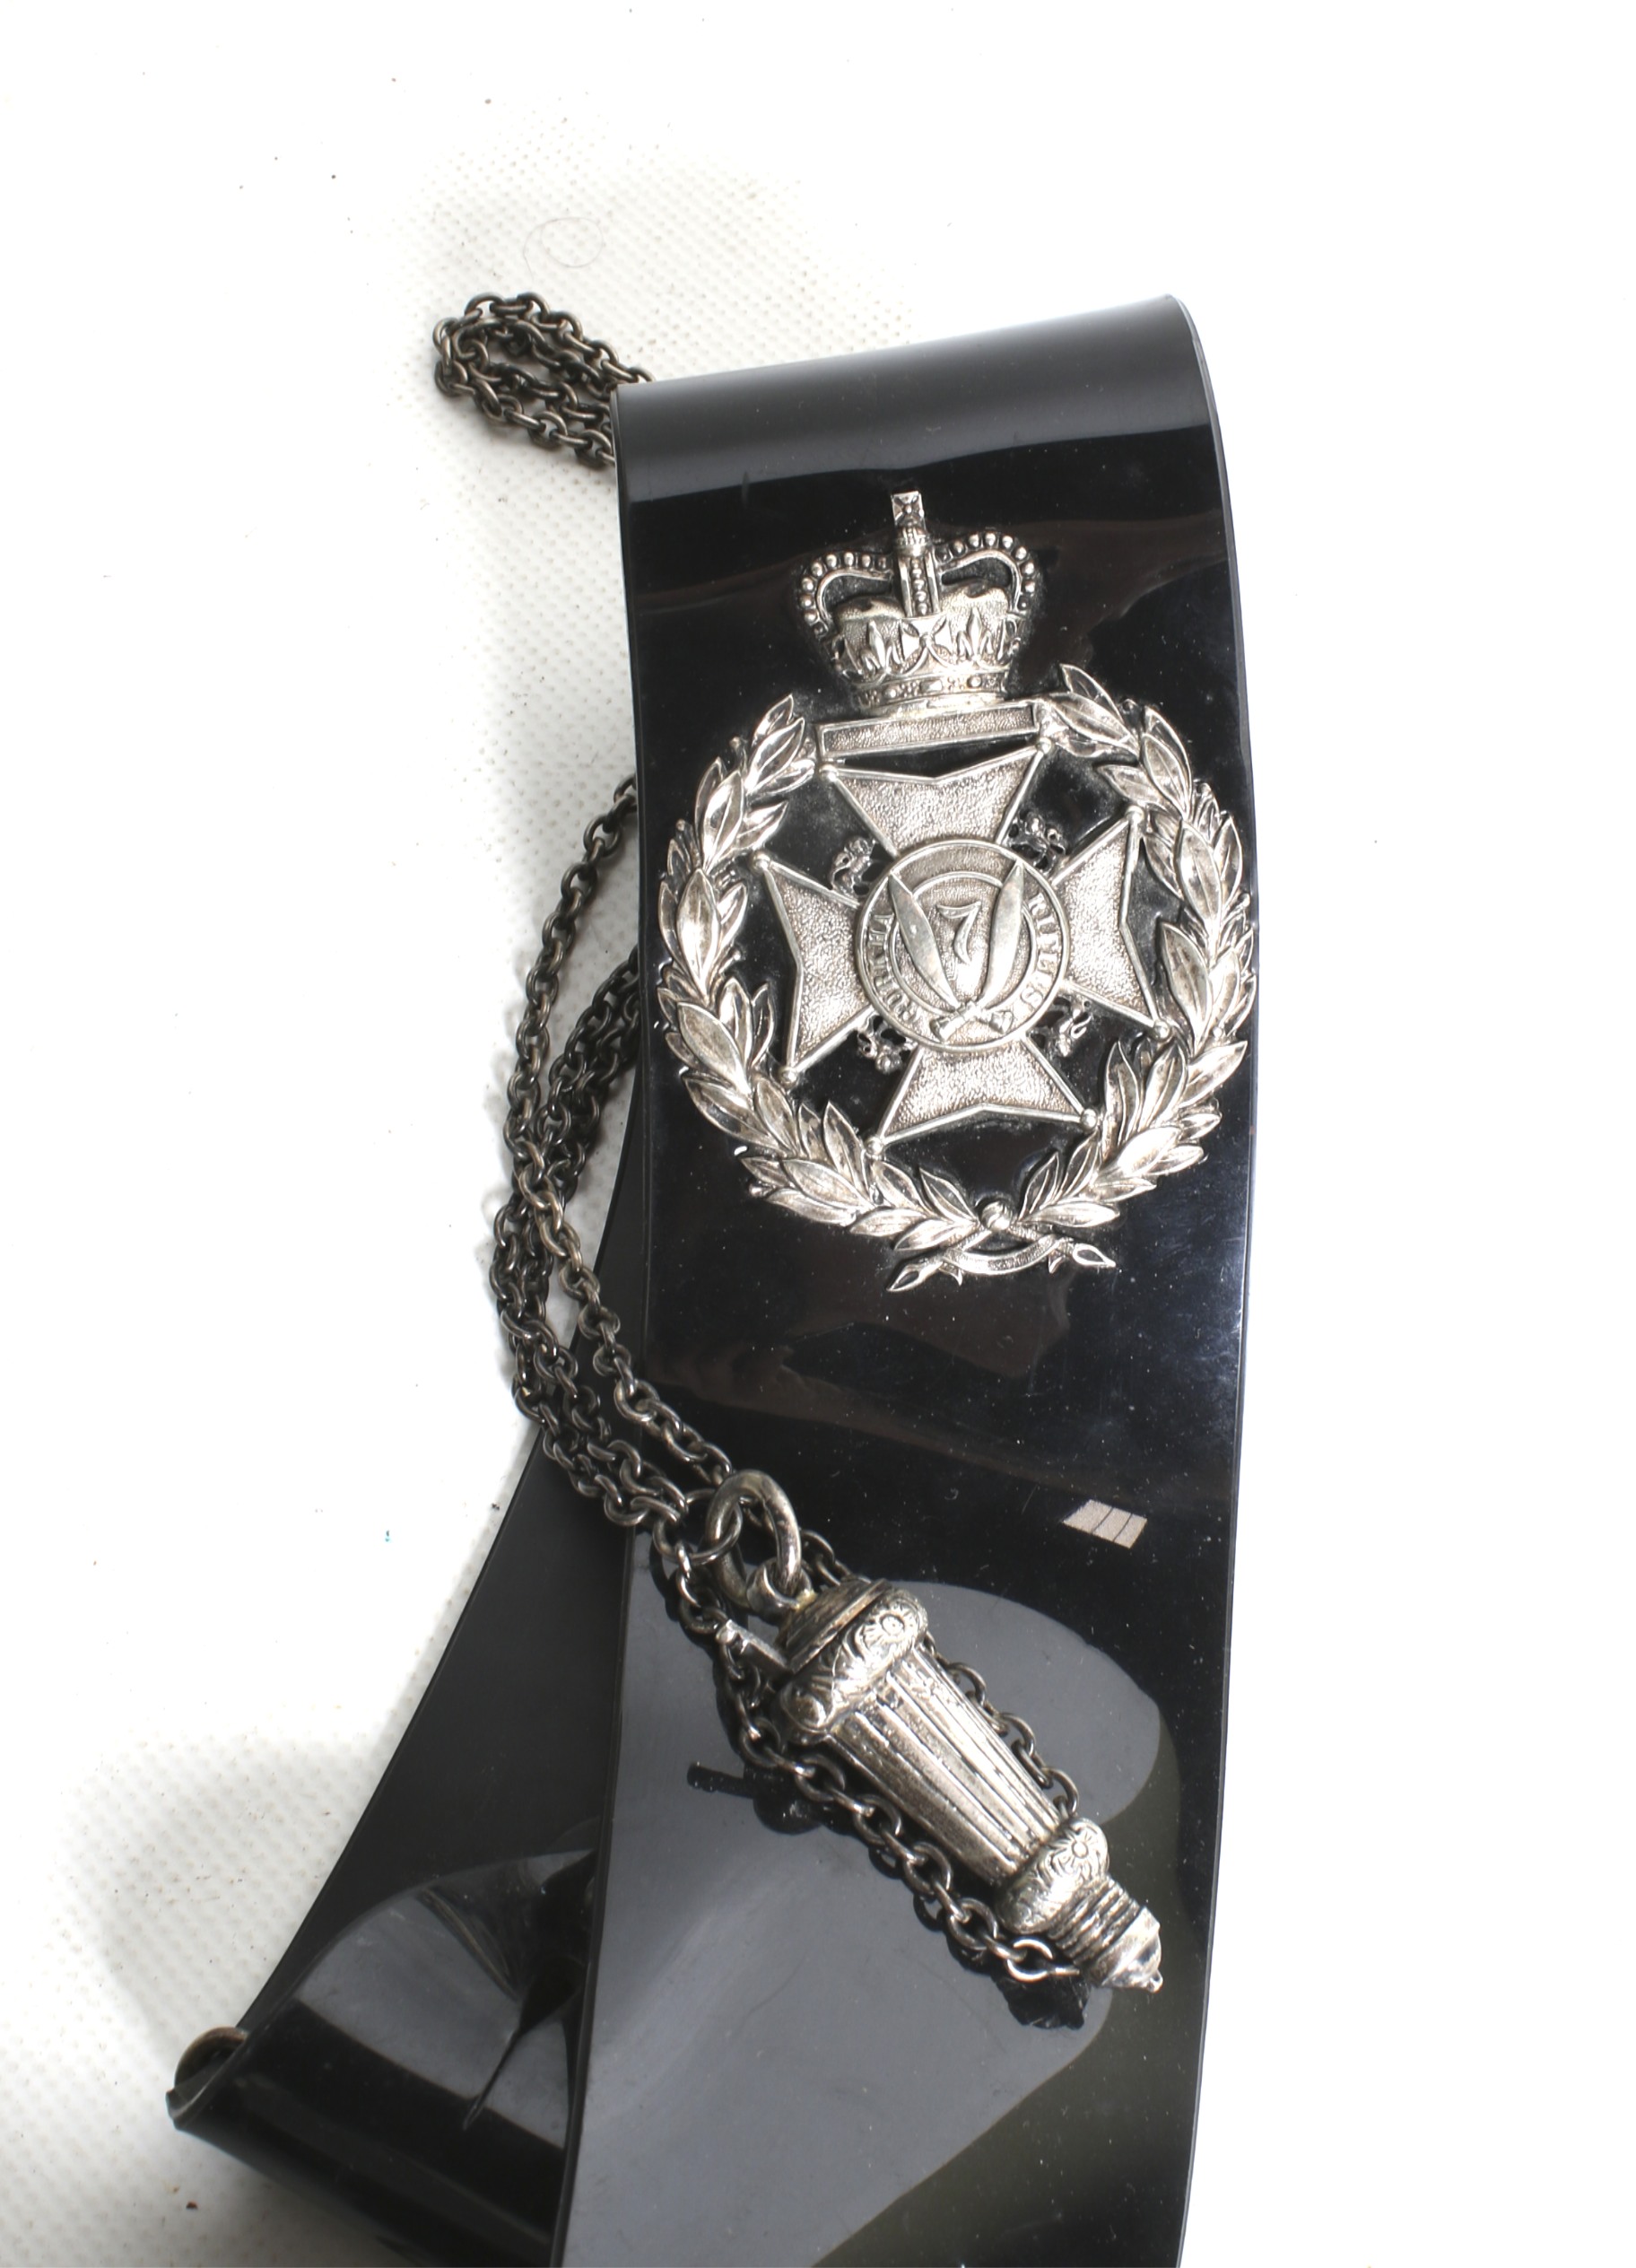 British Army 7th Gurkha Rifles officer's cross belt with chain and whistle - Image 2 of 4